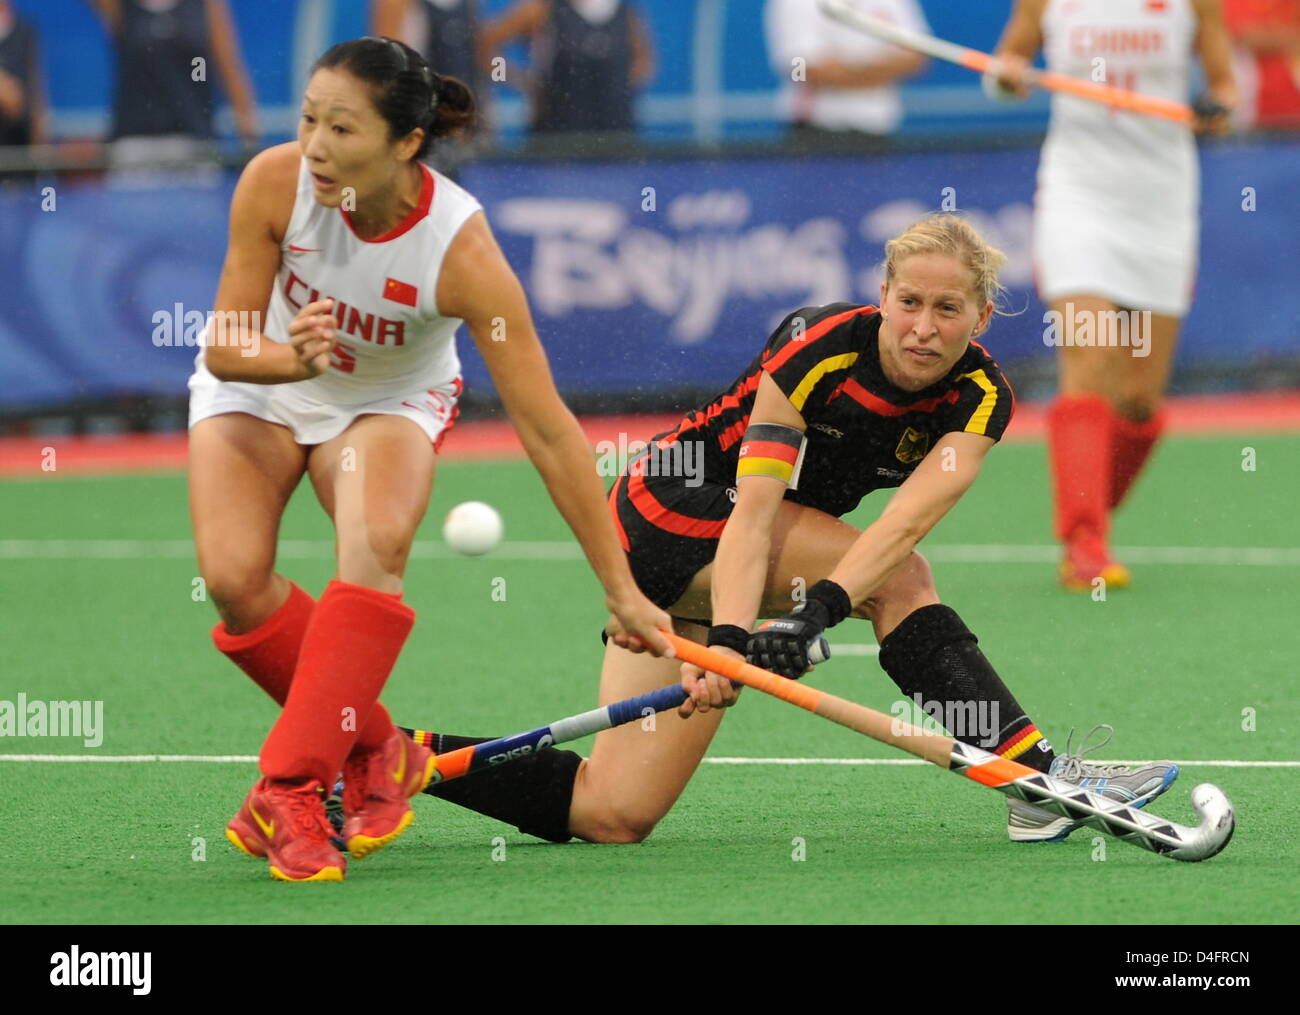 Cheng Hui (L) of China vies with Marion Rodewald of Germany during the Semifinal match Germany against China in the womenÒs Field Hockey competition at the Beijing 2008 Olympic Games, Beijing, China, 20 August 2008. Photo: Peer Grimm ###dpa### Stock Photo